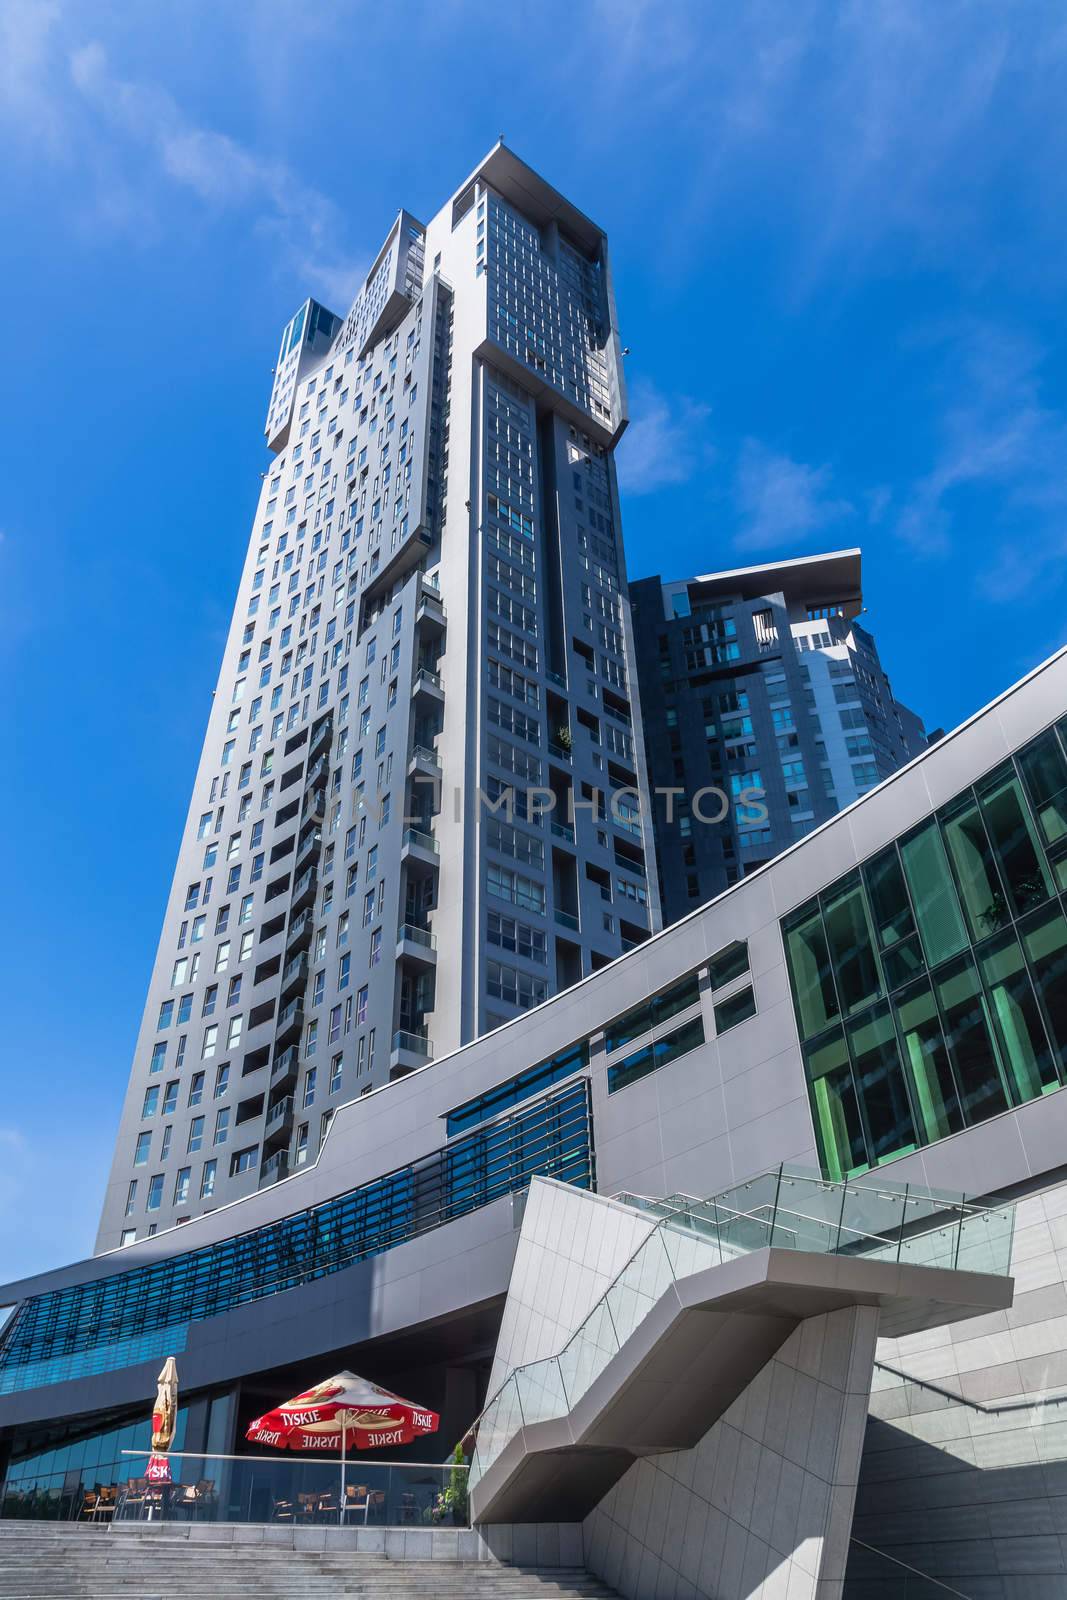 The Sea Towers in Gdynia, multi-use skyscraper. Built in 2009 building is the 10th tallest building in Poland and the second tallest residential building in the country.